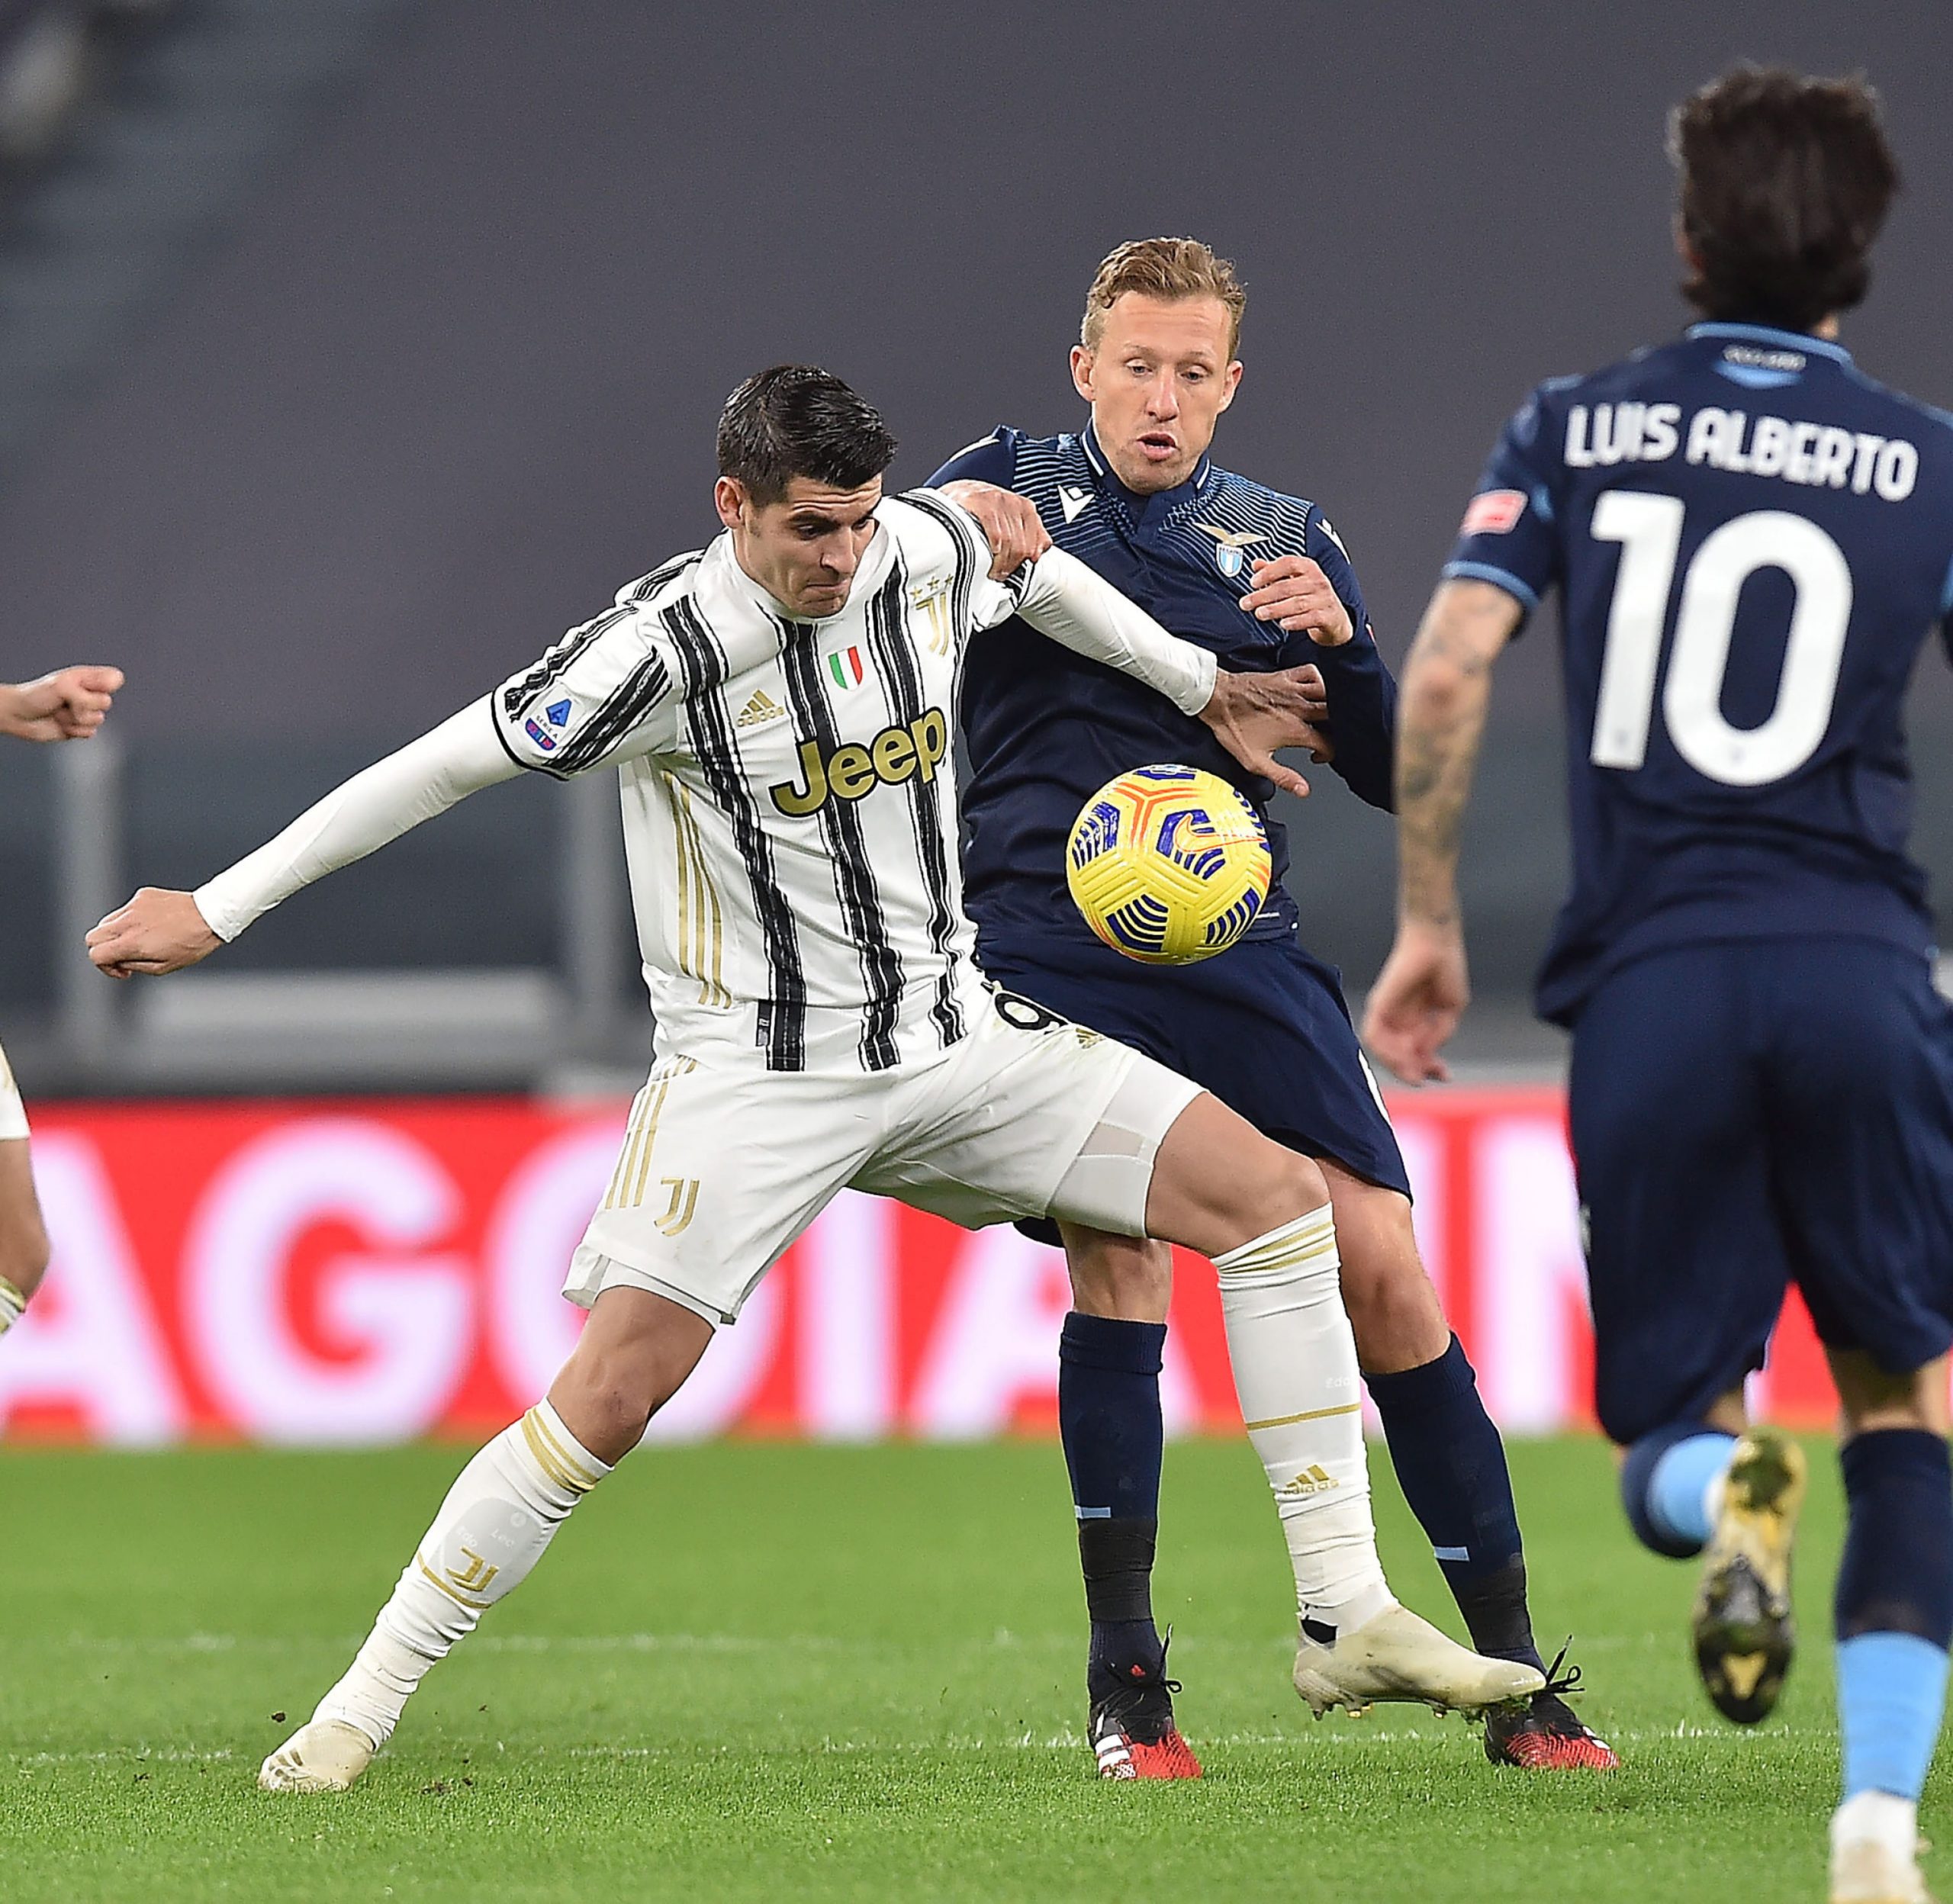 epa09057894 Juventus' Alvaro Morata (L) and Lazio's Lucas Leiva (C) in action during the Italian Serie A soccer match between Juventus FC and SS Lazio in Turin, Italy, 06 March 2021.  EPA/ALESSANDRO DI MARCO